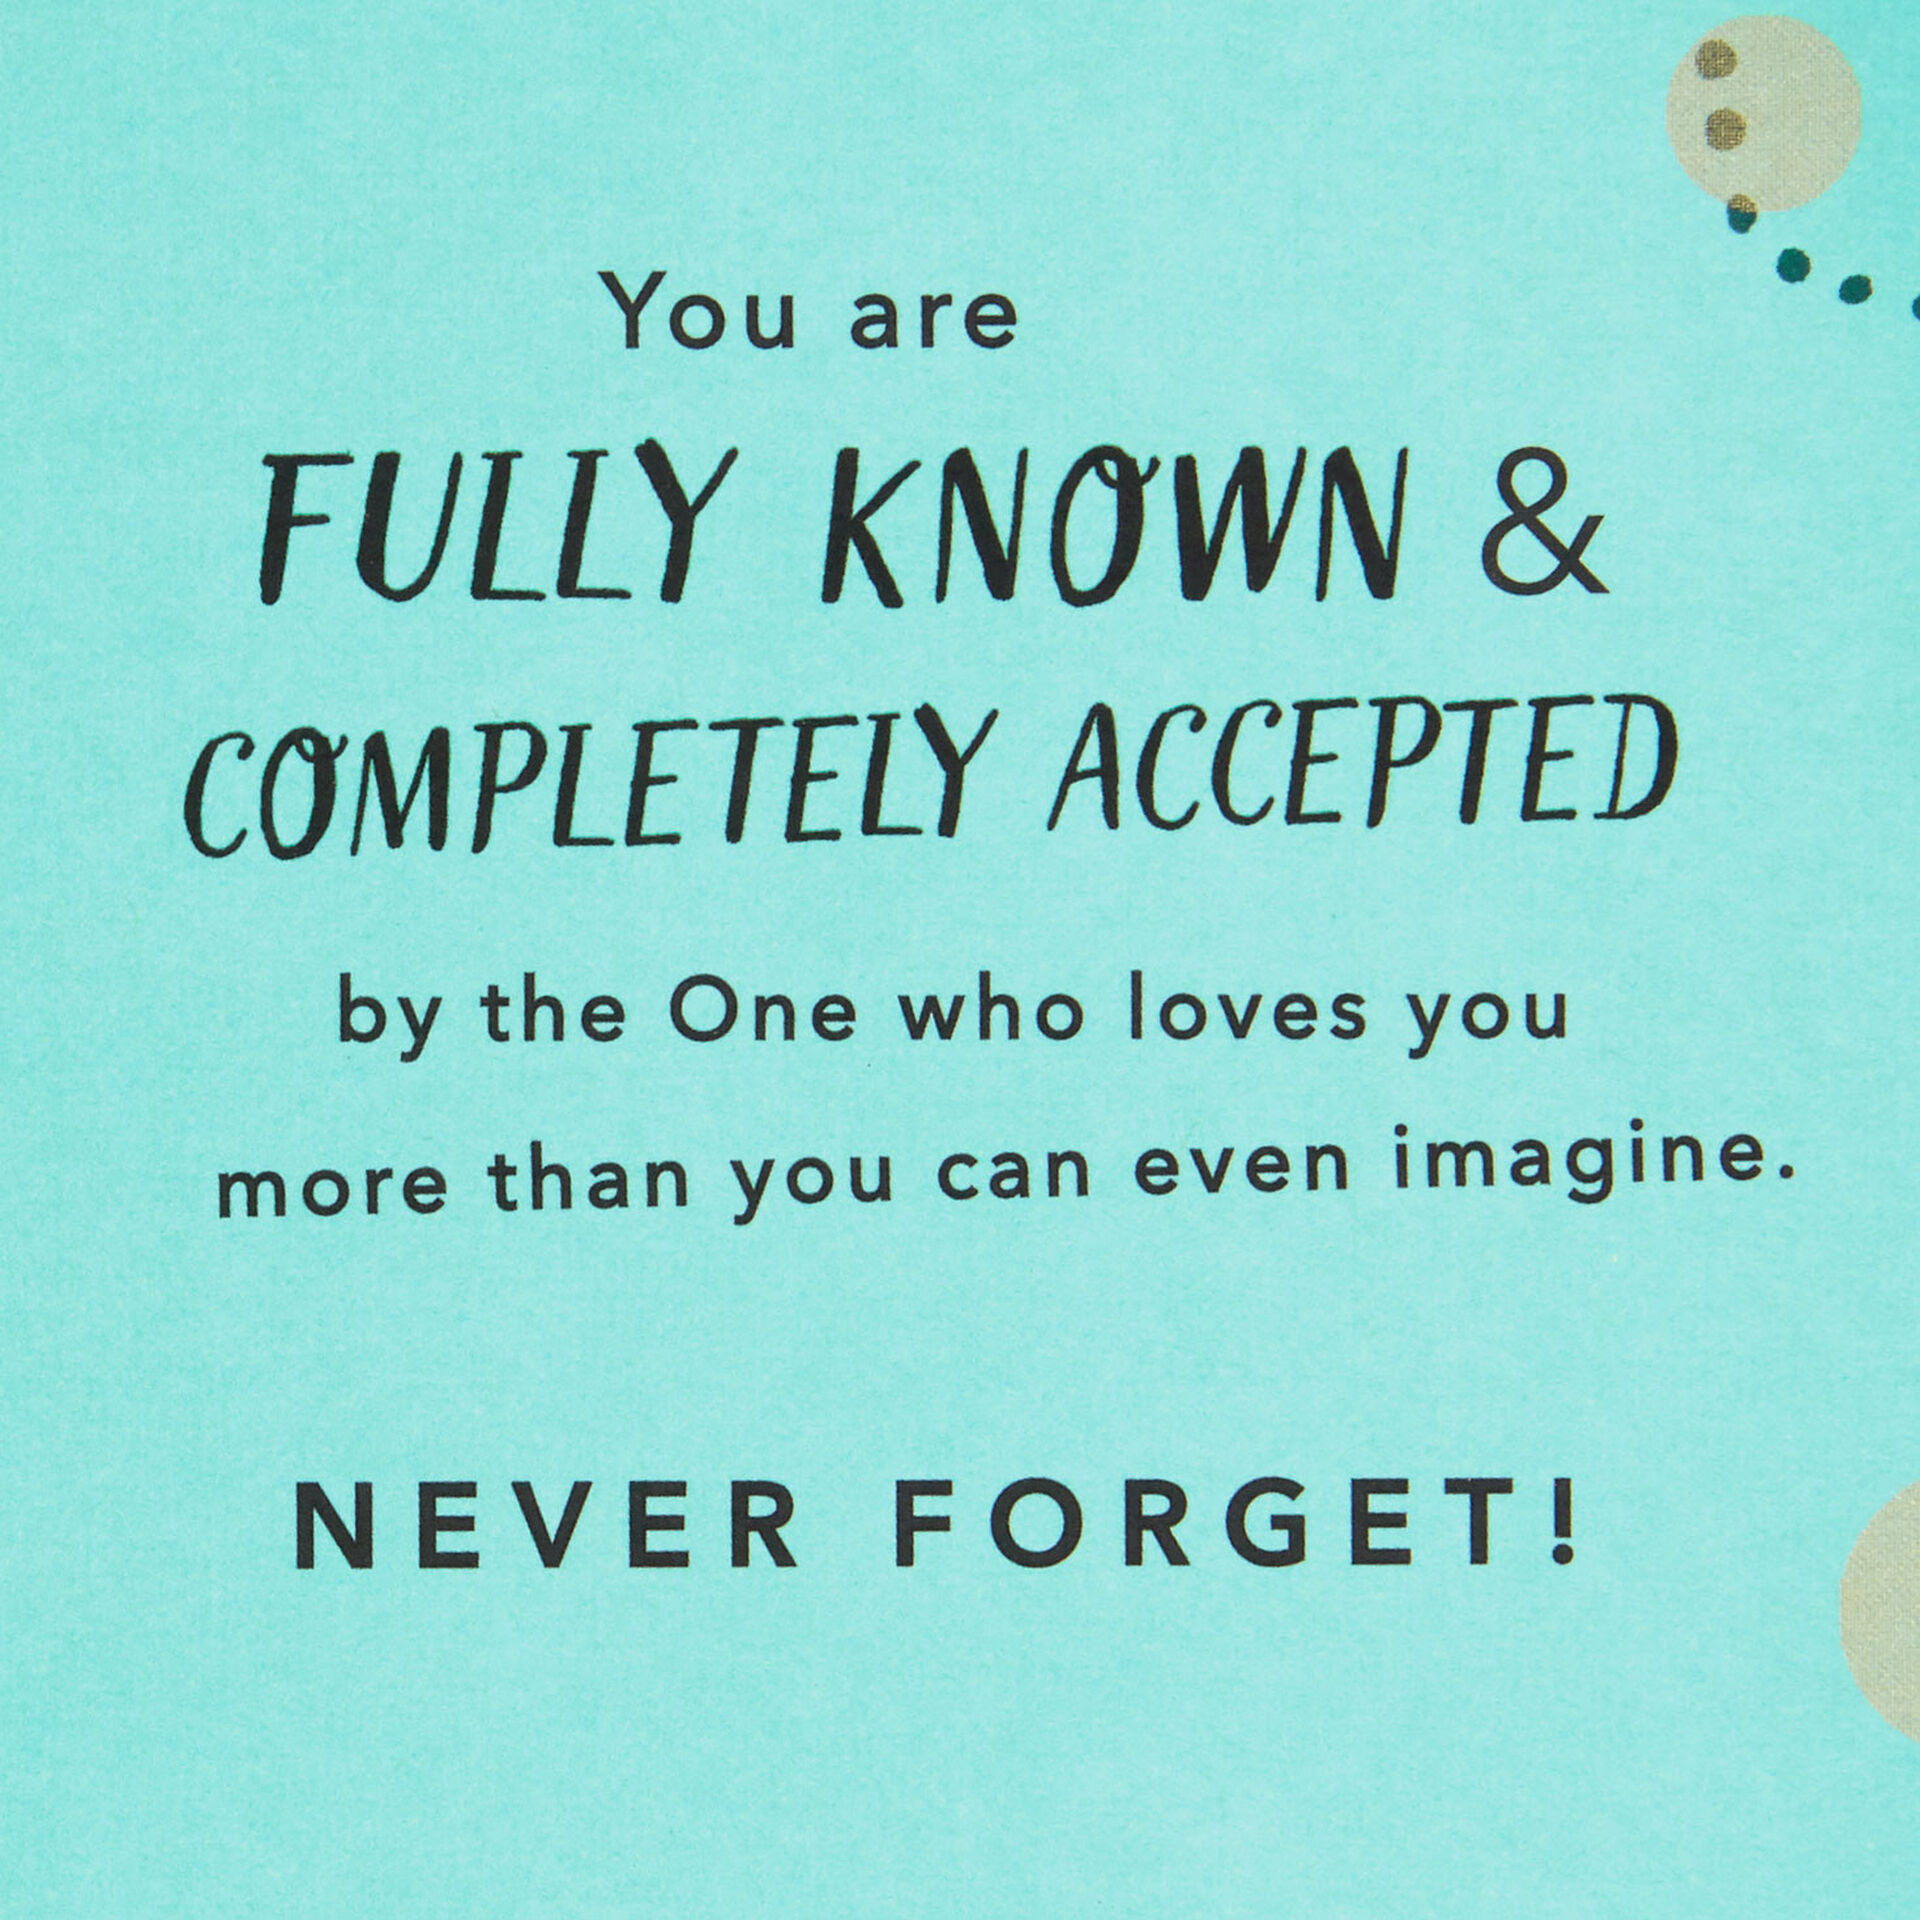 Are-Loved-Accepted-Encouragement-Card_399CEY2320_02